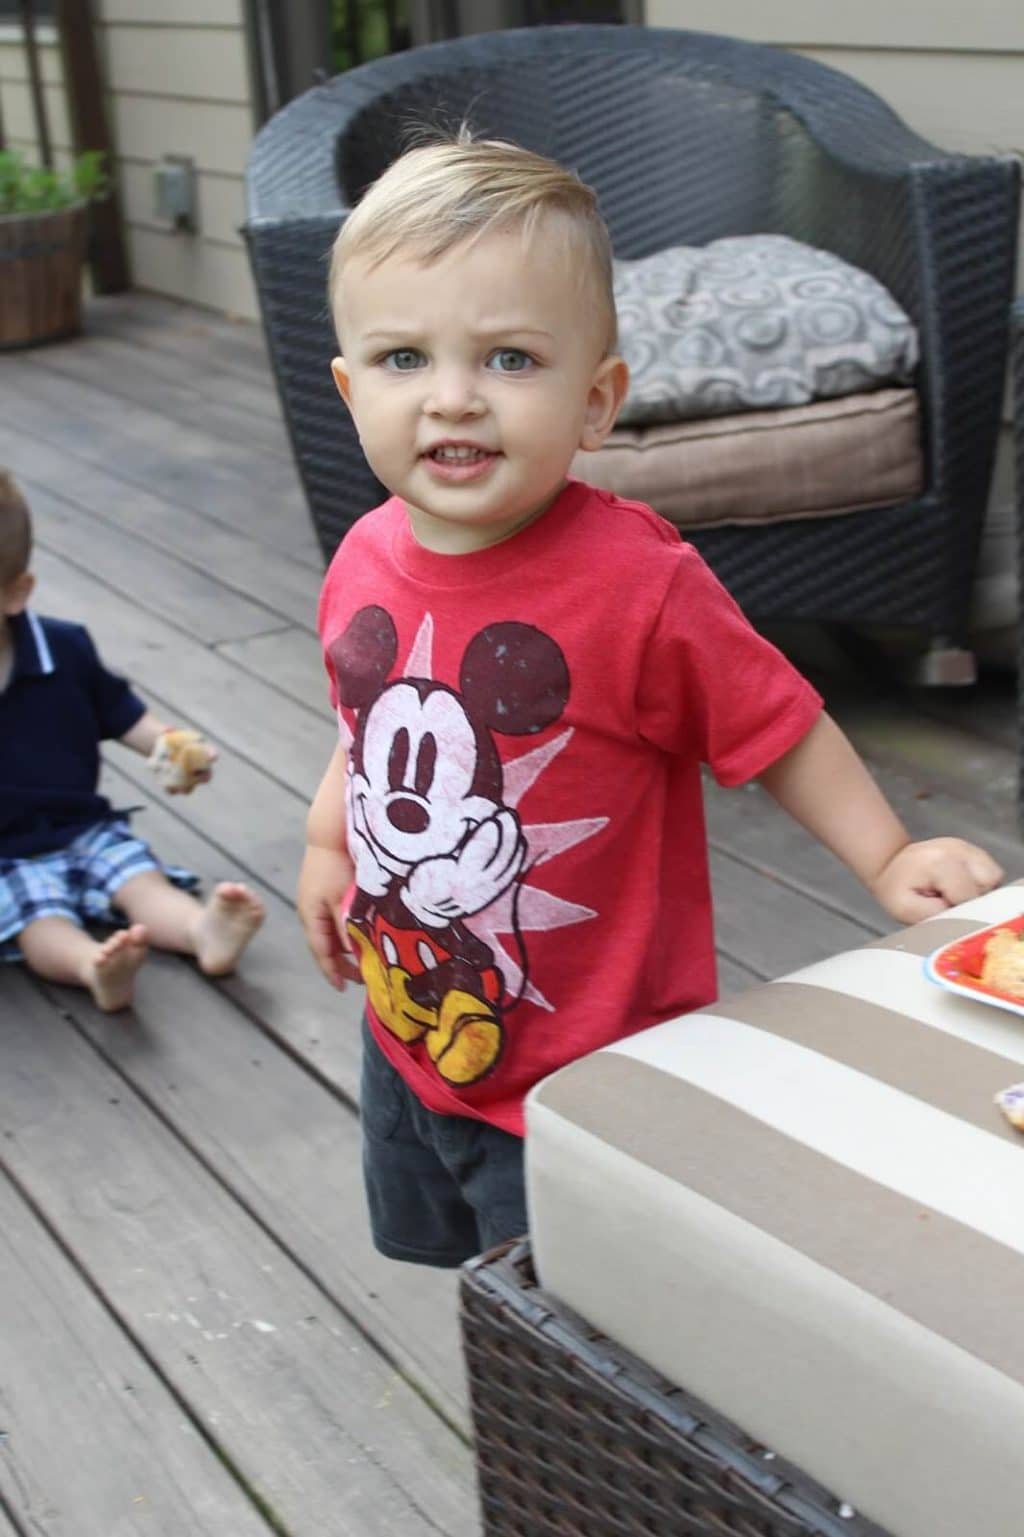 Stilettos and Diapers, #DisneyKids Mickey Mouse Clubhouse party ideas, tips, food